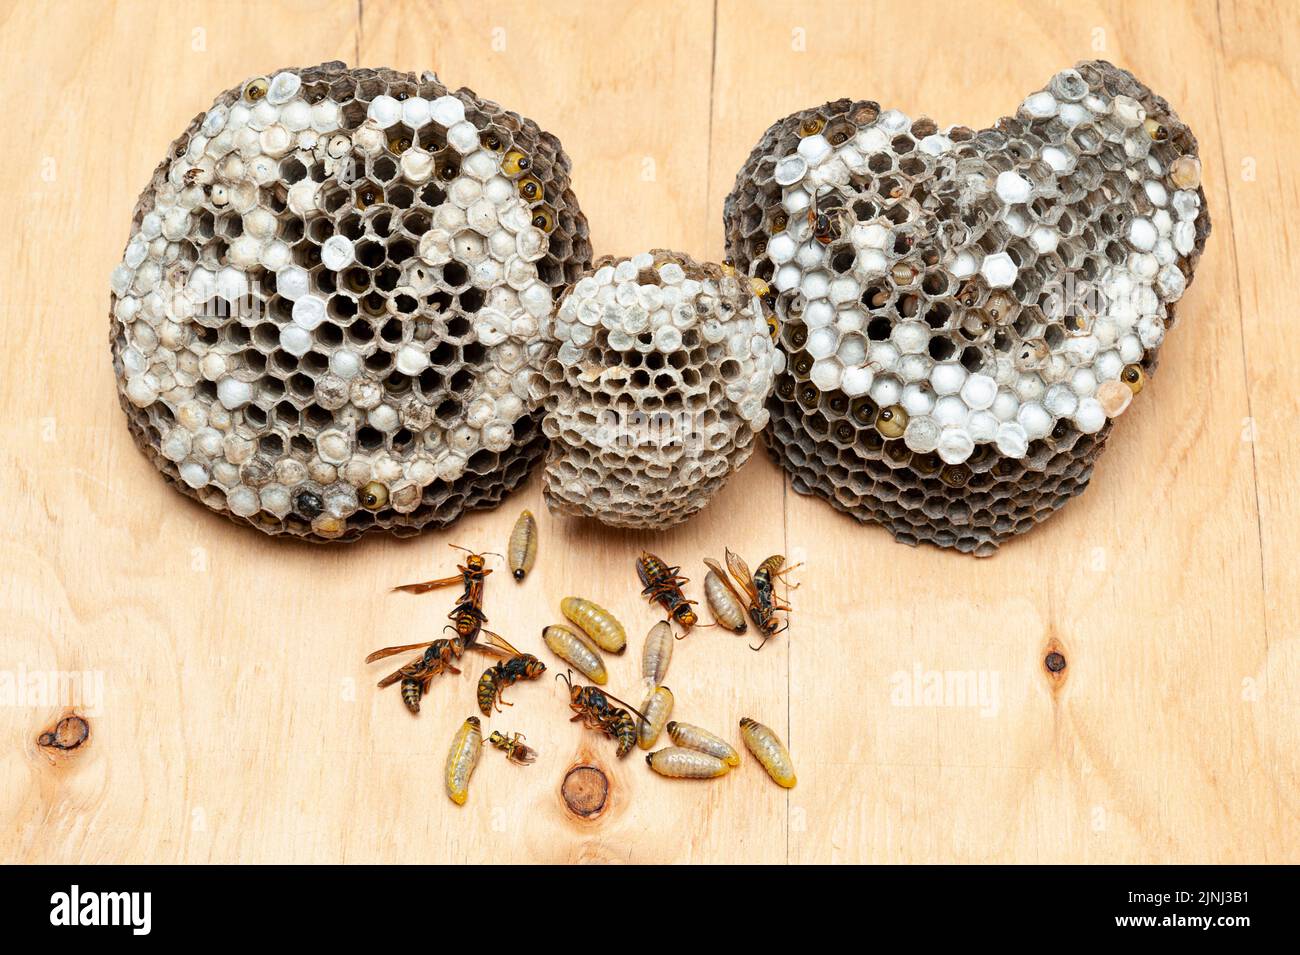 Dead larvae an wasps known as Asian Giant Hornet or Japanese Giant Hornet with comb on wooden table. Stock Photo